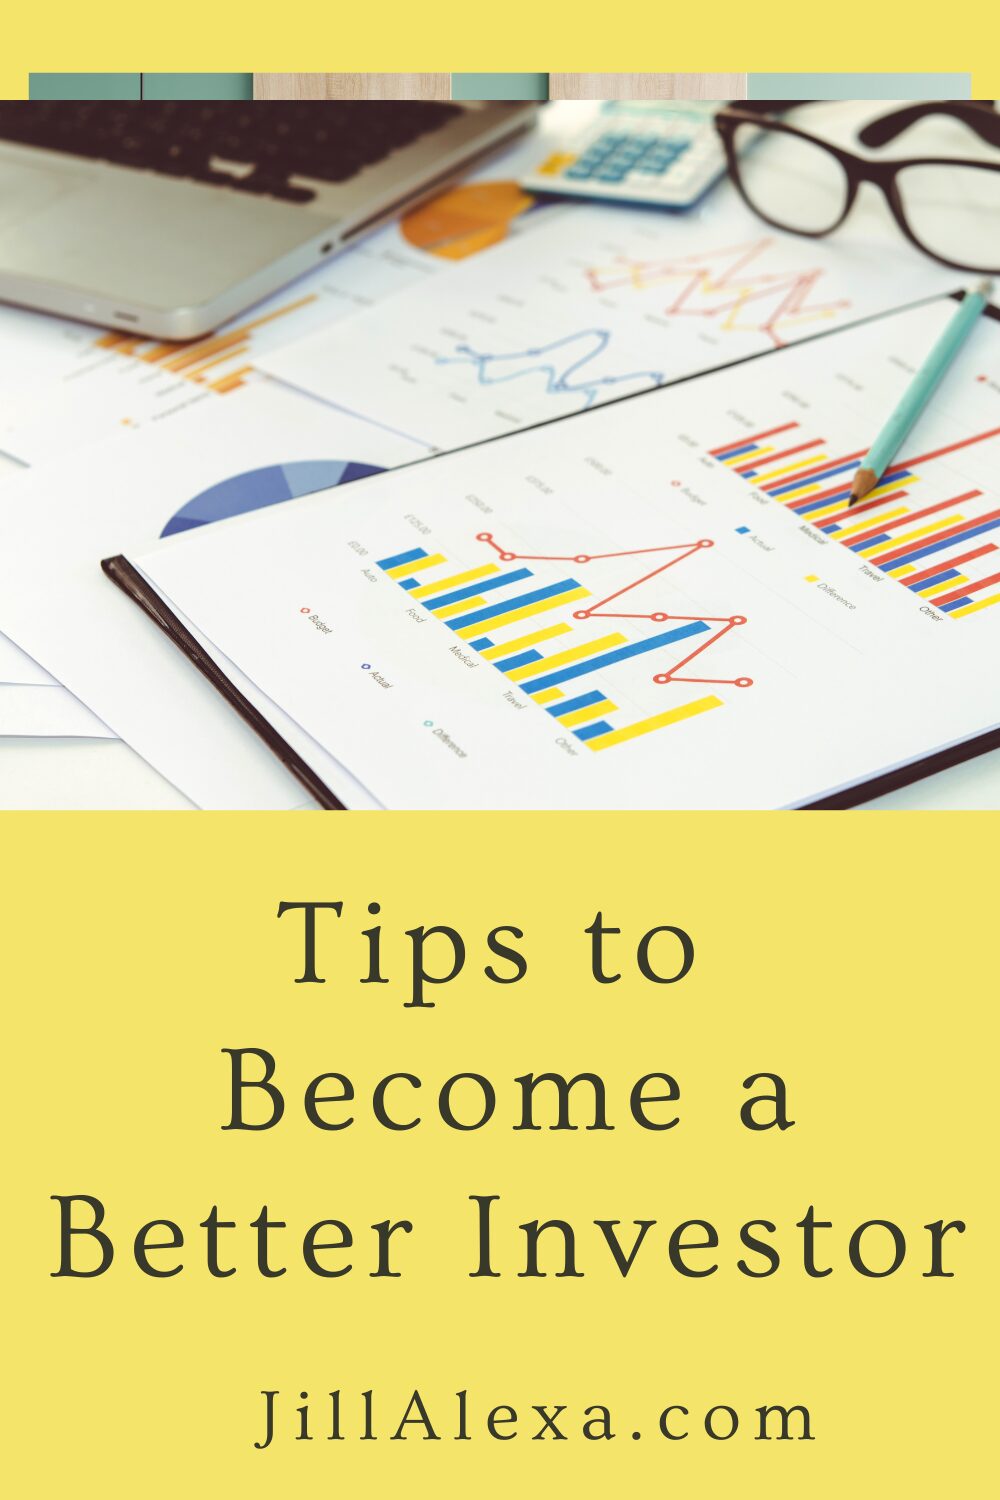 Tips to Become a Better Investor Do you feel as though you aren’t a good investor? If so then there are things you can do to try and turn things around. 